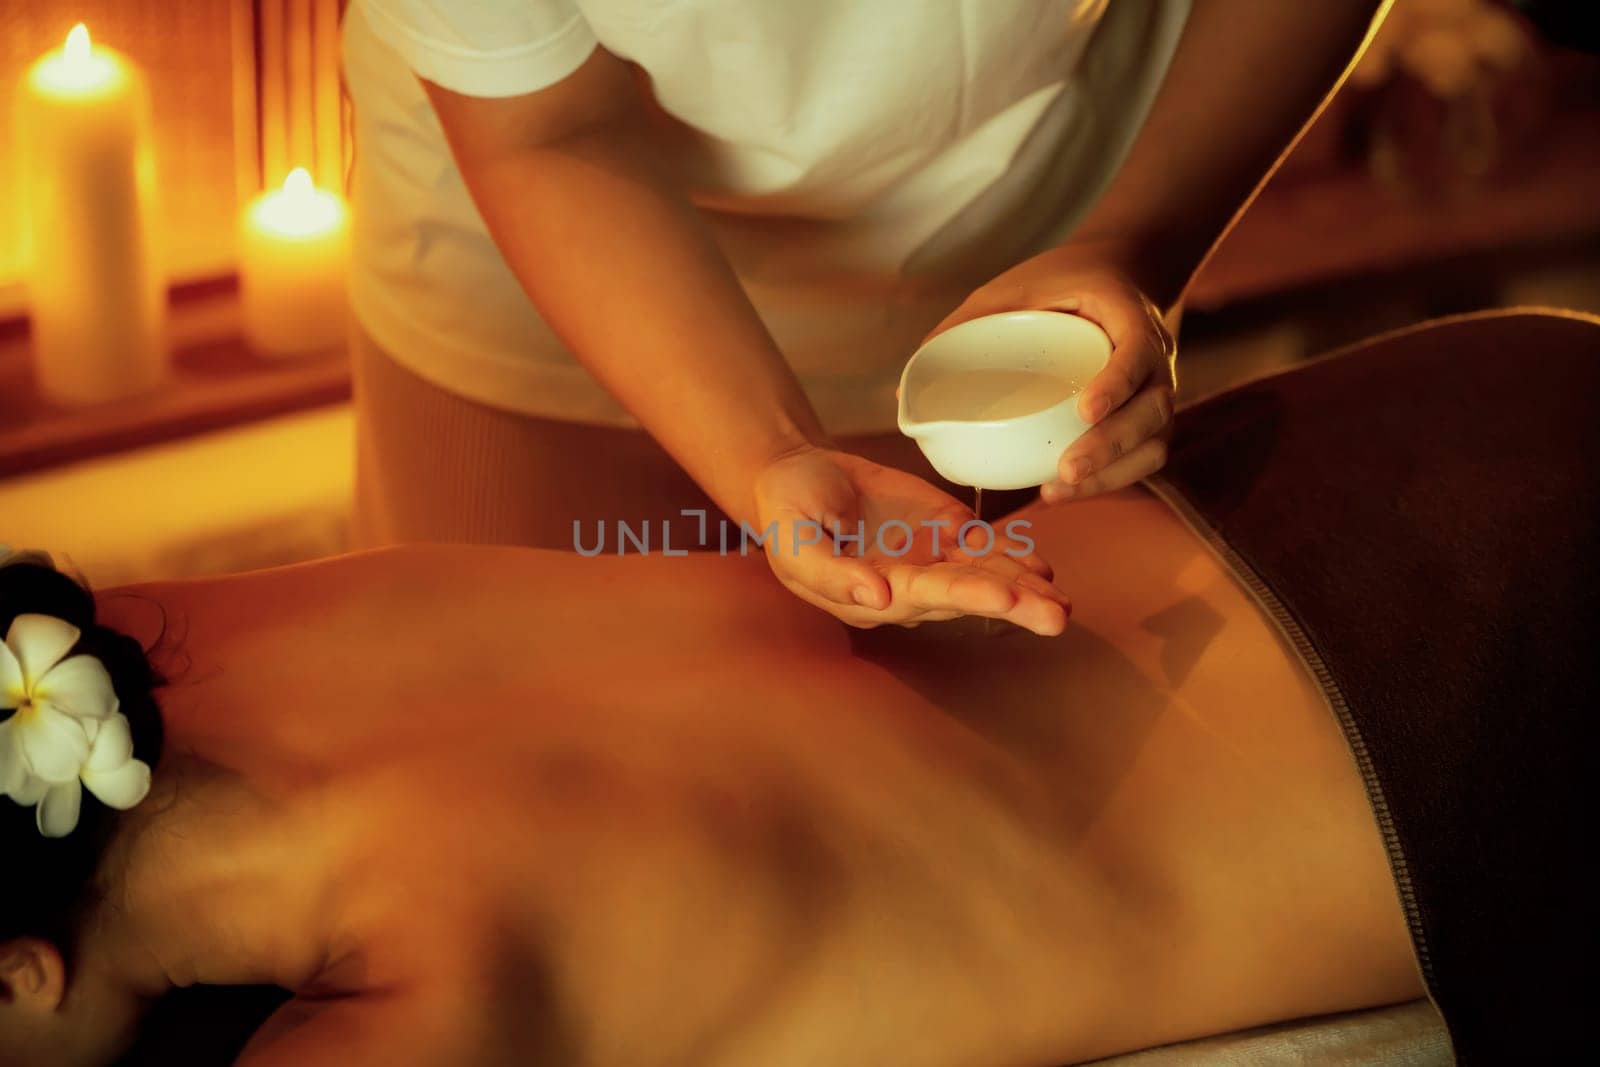 Masseur hands pouring aroma oil on woman back. Masseuse prepare oil massage procedure for customer at spa salon in luxury resort. Aroma oil body massage therapy concept. Quiescent